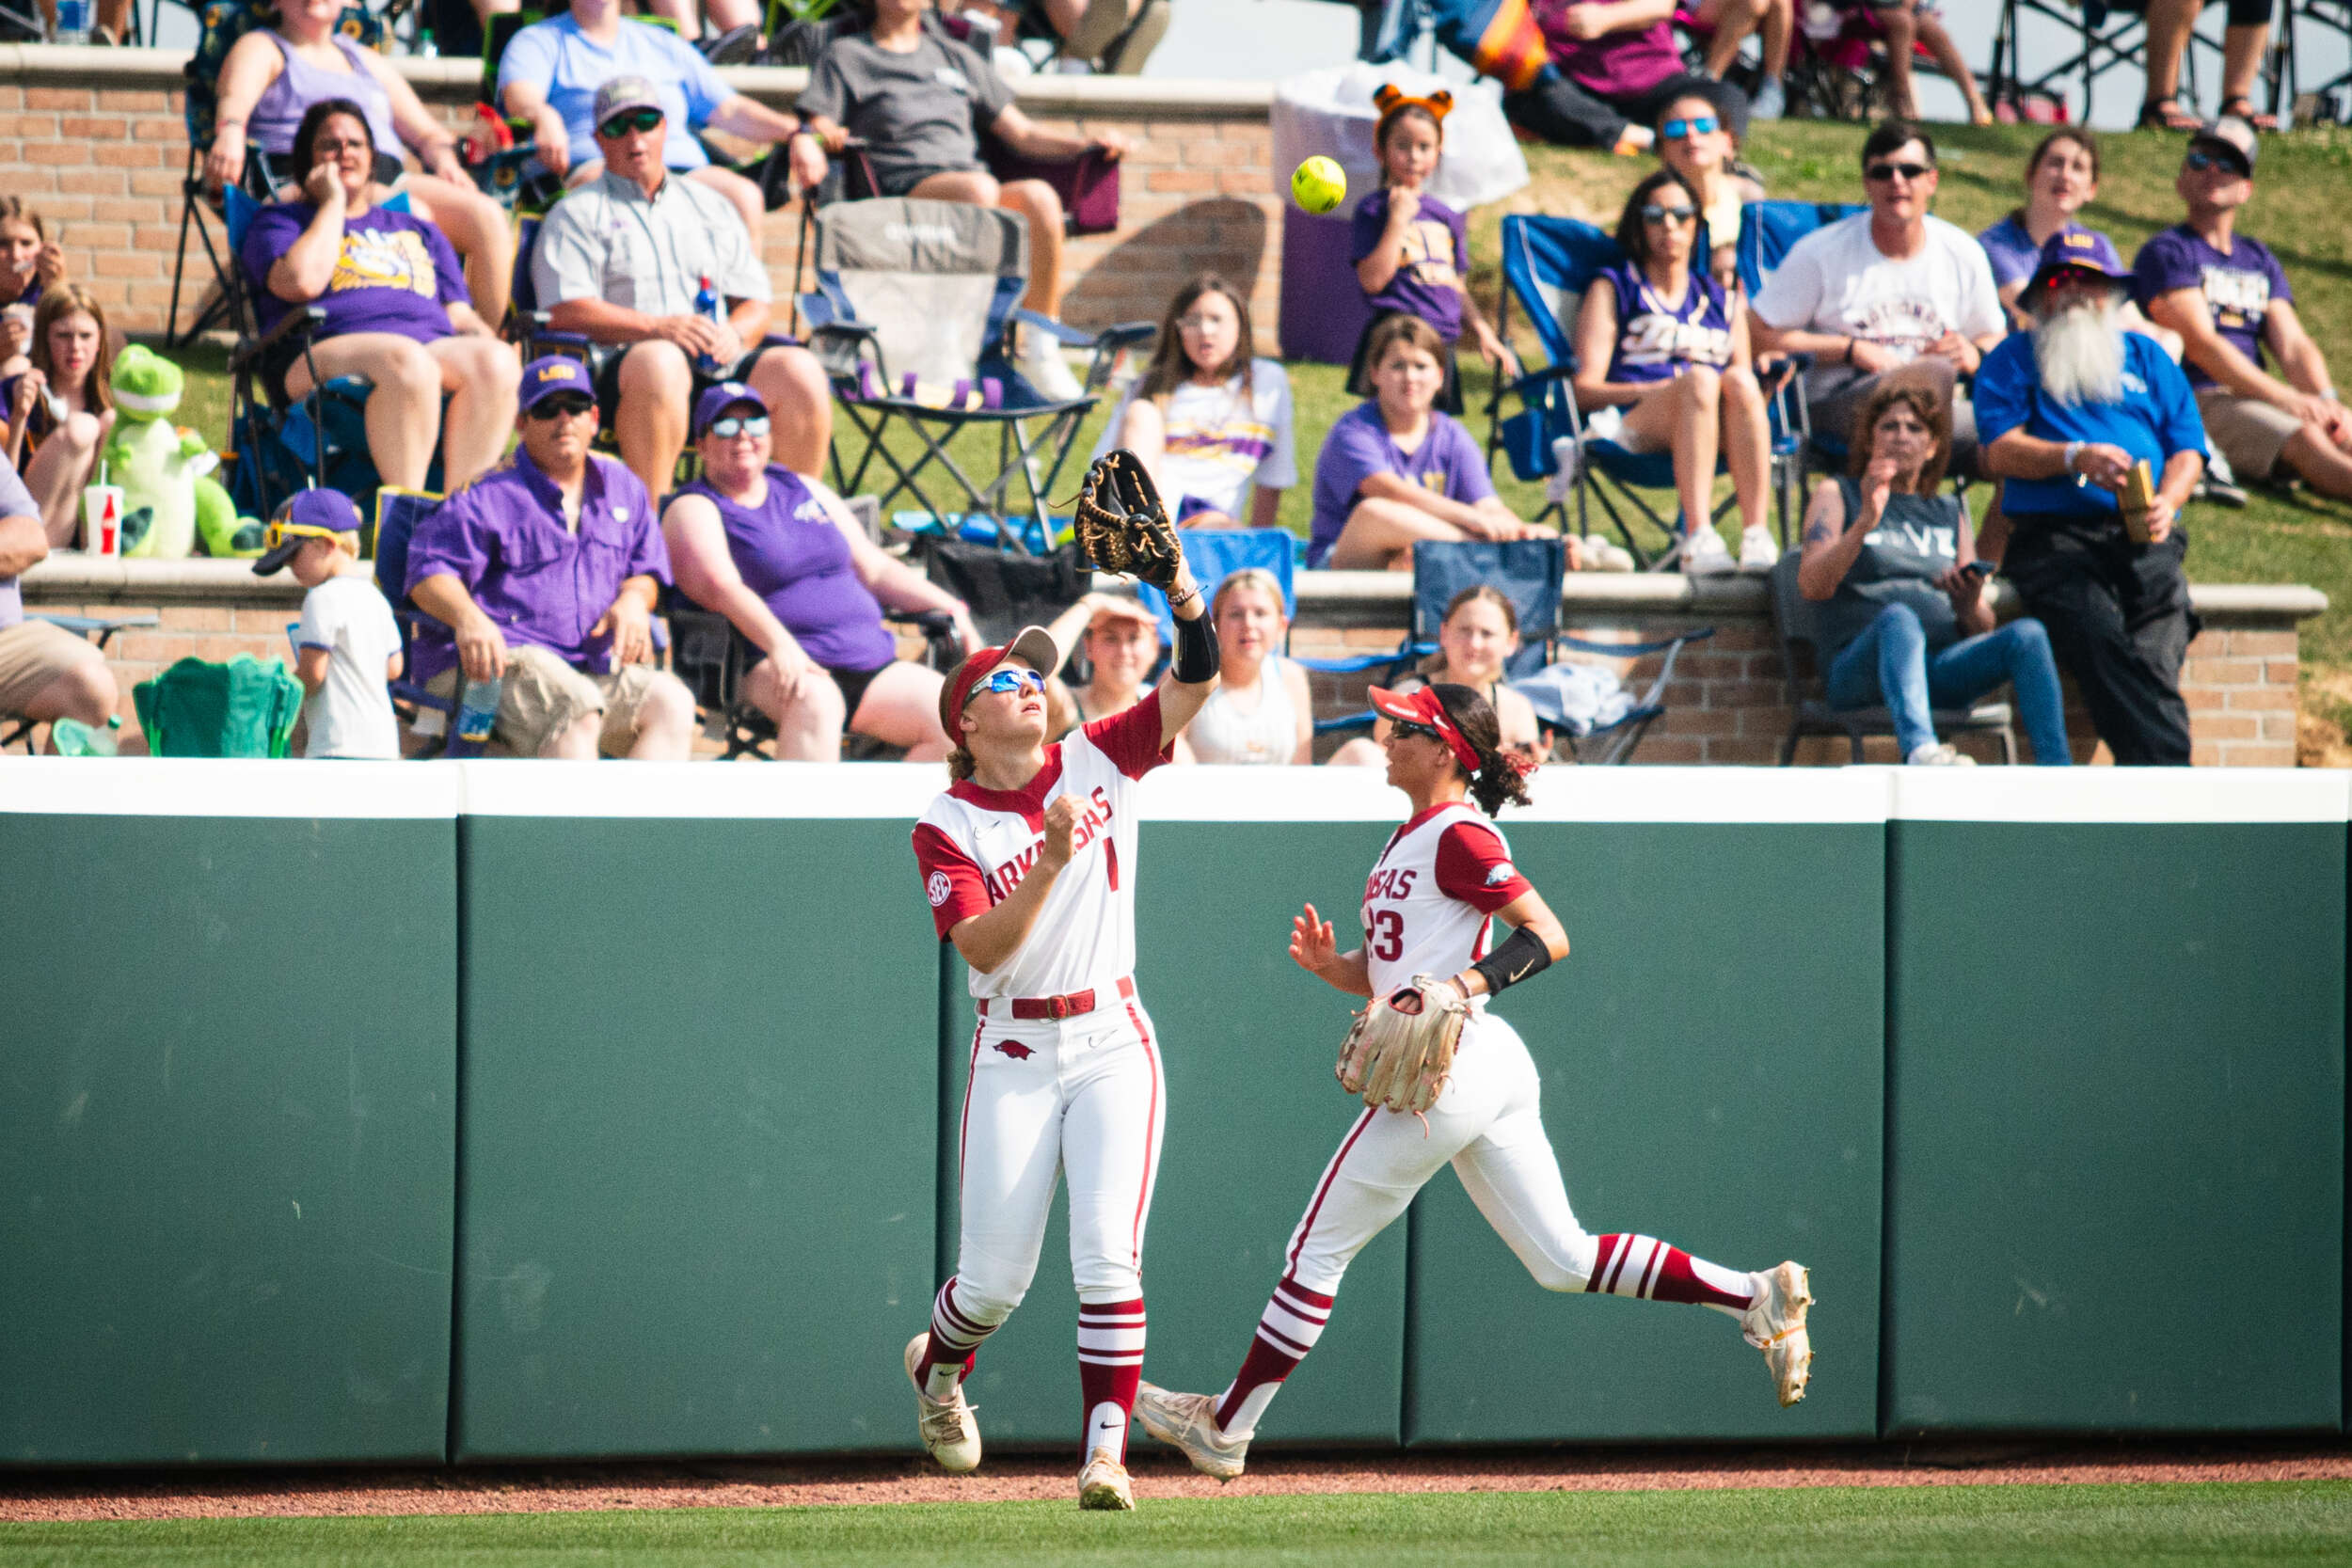 No. 13 Razorbacks Capitalize on Three-Run Third, Win Back-to-Back Series at No. 7 LSU for First Time in Program History